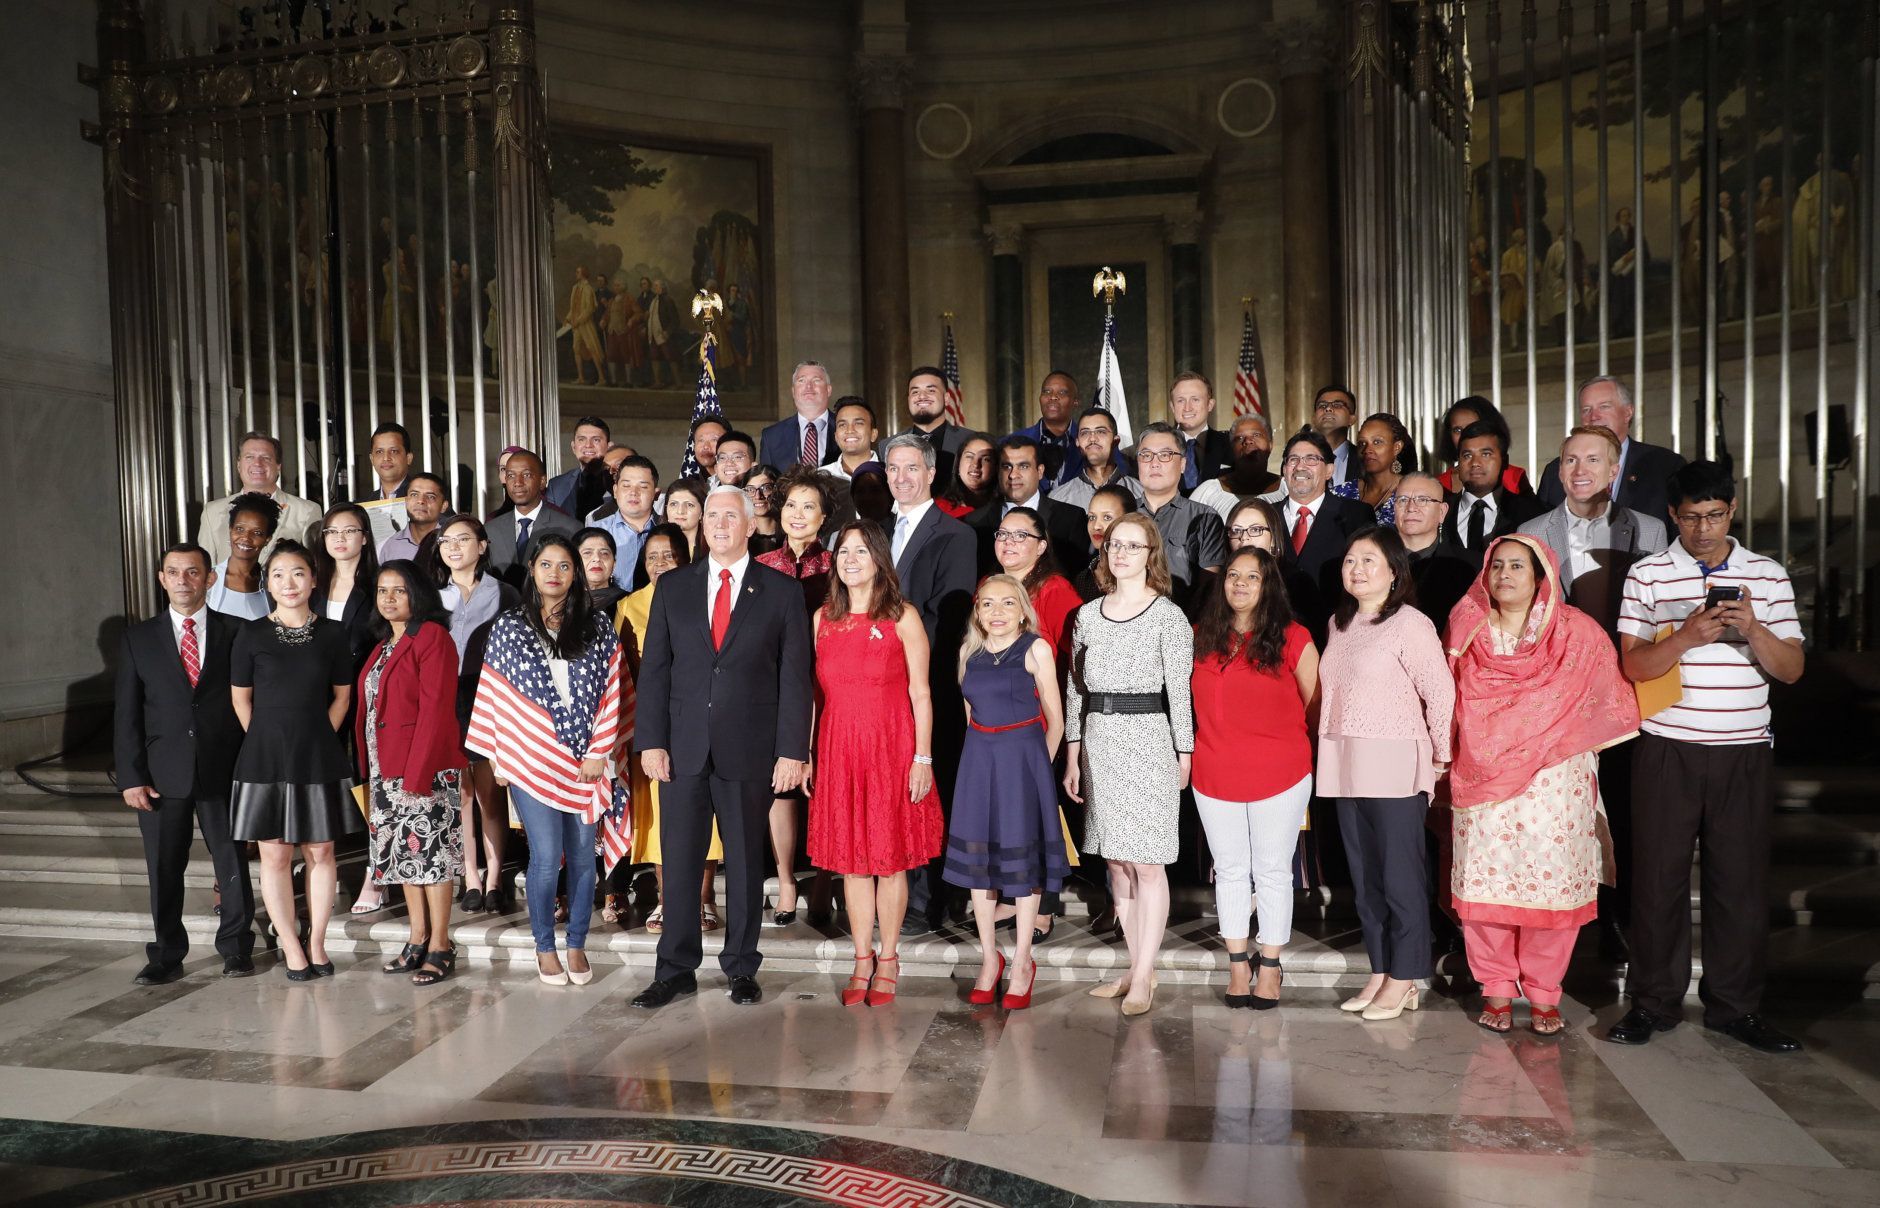 Vice President Mike Pence, center, his wife Karen Pence, pose for a group photo with new naturalized citizens following a naturalization ceremony in celebration of Independence Day at the National Archives in Washington, Thursday, July 4, 2019. Standing behind the Vice President are Secretary of Transportation Elaine Chao and Acting Director, US Immigration and Immigration Services, Kenneth T. Cuccinelli. (AP Photo/Pablo Martinez Monsivais)